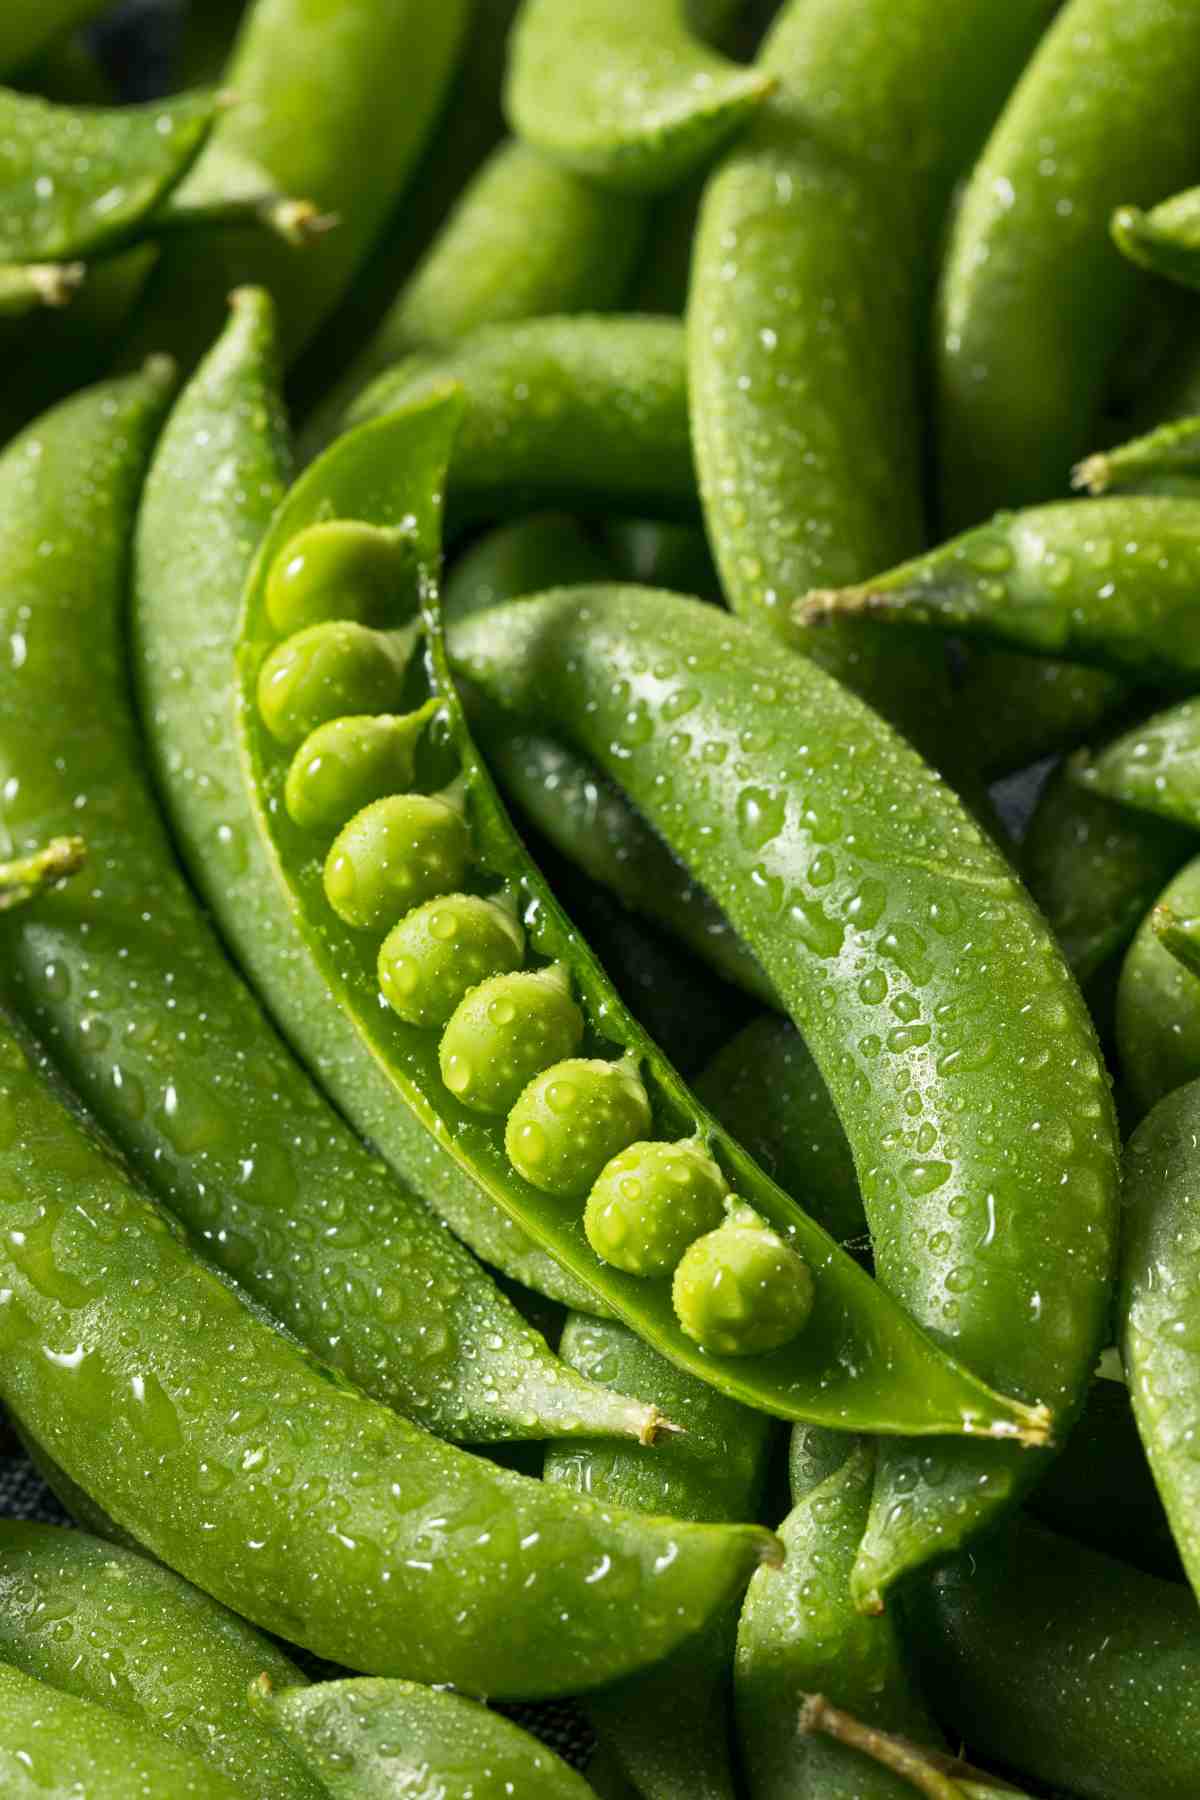 Do you know how many carbs are in peas? Are they suitable for your new keto lifestyle? Peanuts have loads of essential nutrients. Read on to find out if they are keto-friendly, too.